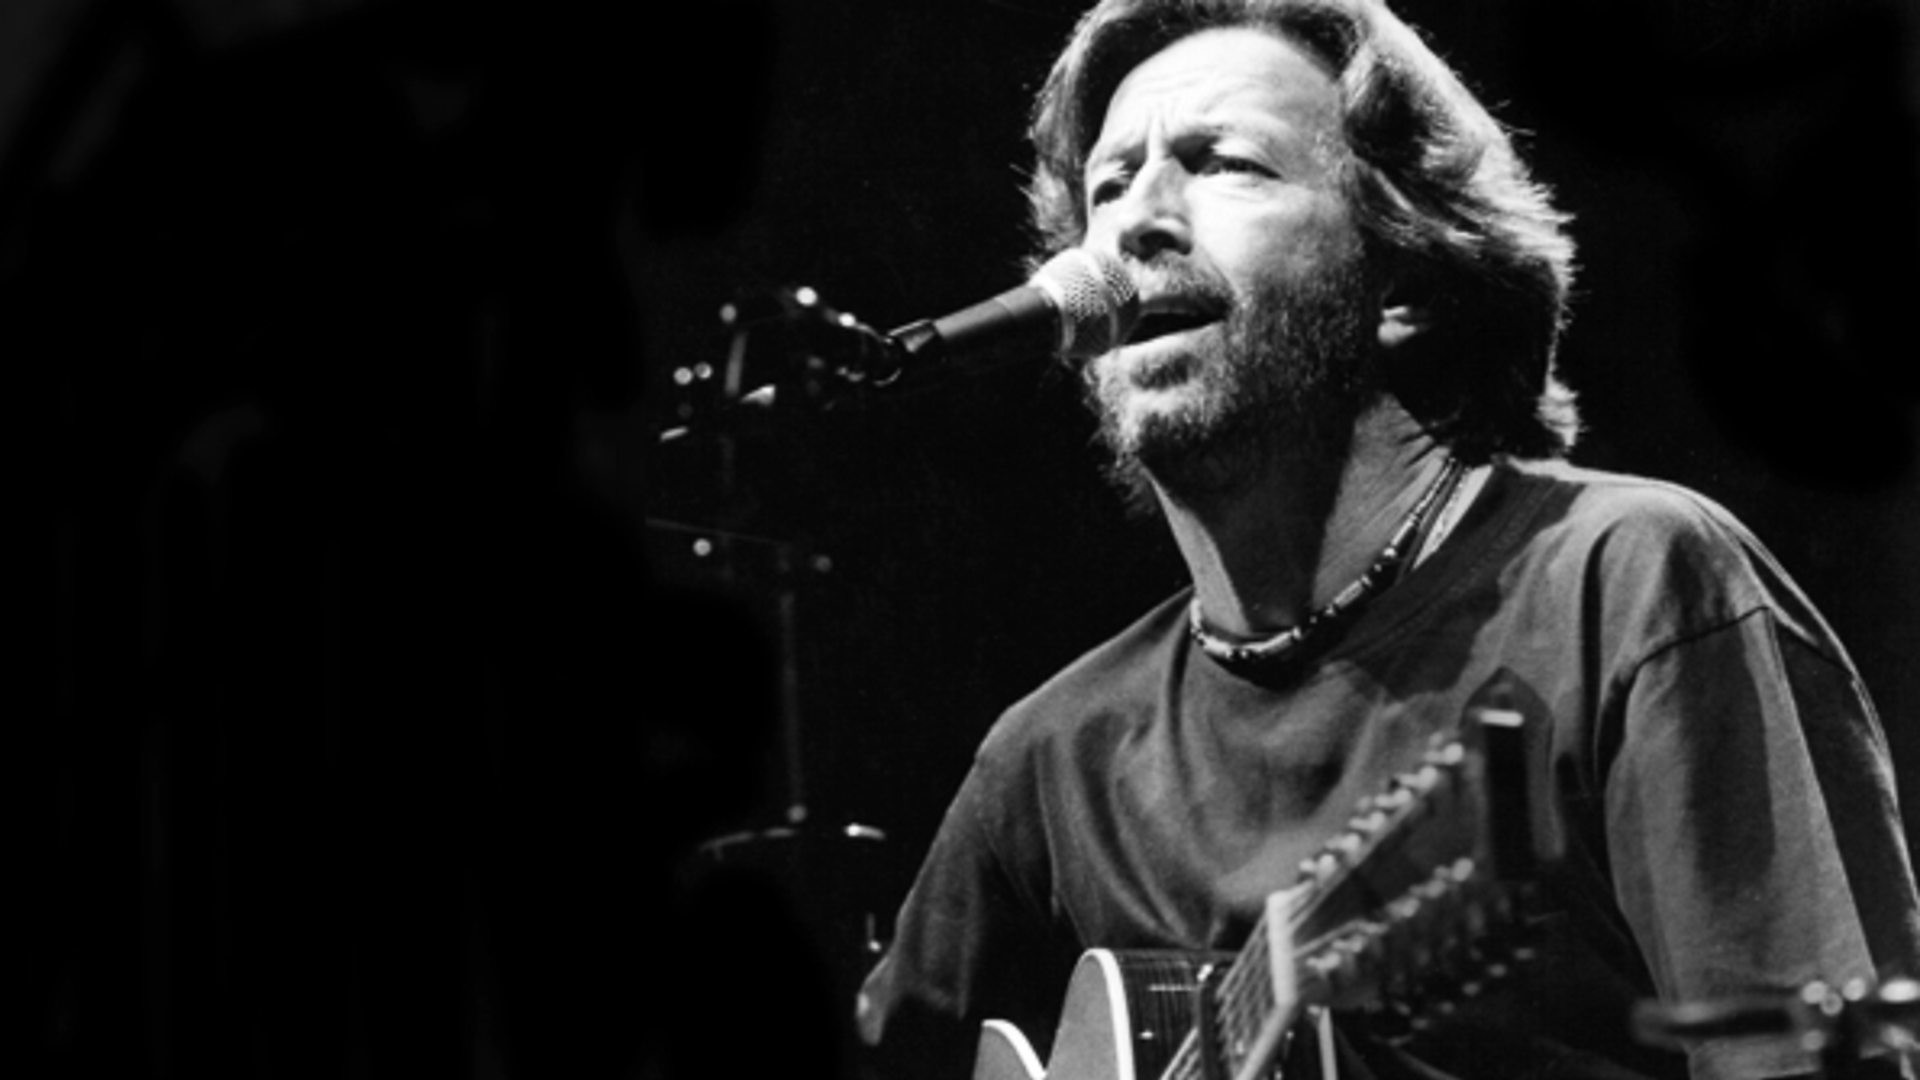 1920x1080 BBC Radio 4 - For One Night Only, Series 7, Clapton Unplugged, Eric  Clapton's extended interview with Paul Gambaccini